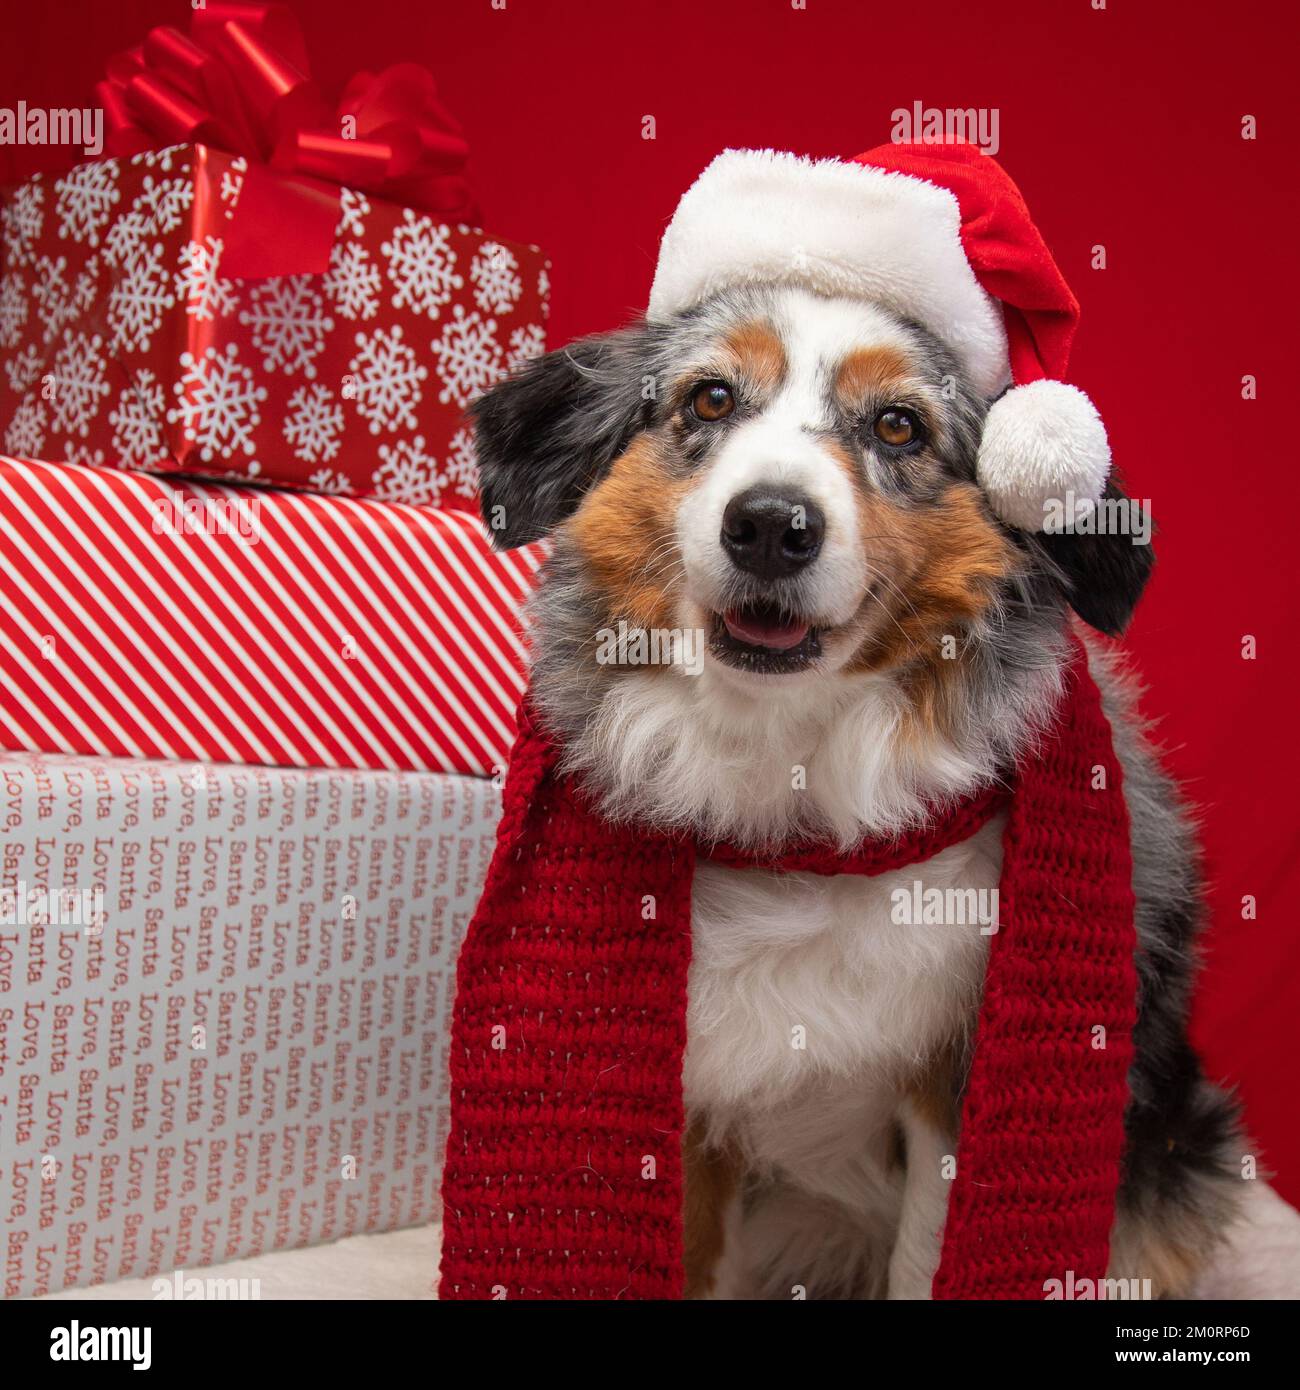 Miniature Australian shepherd dressed in a Santa hat and scarf sitting next to a stack of Christmas gifts Stock Photo